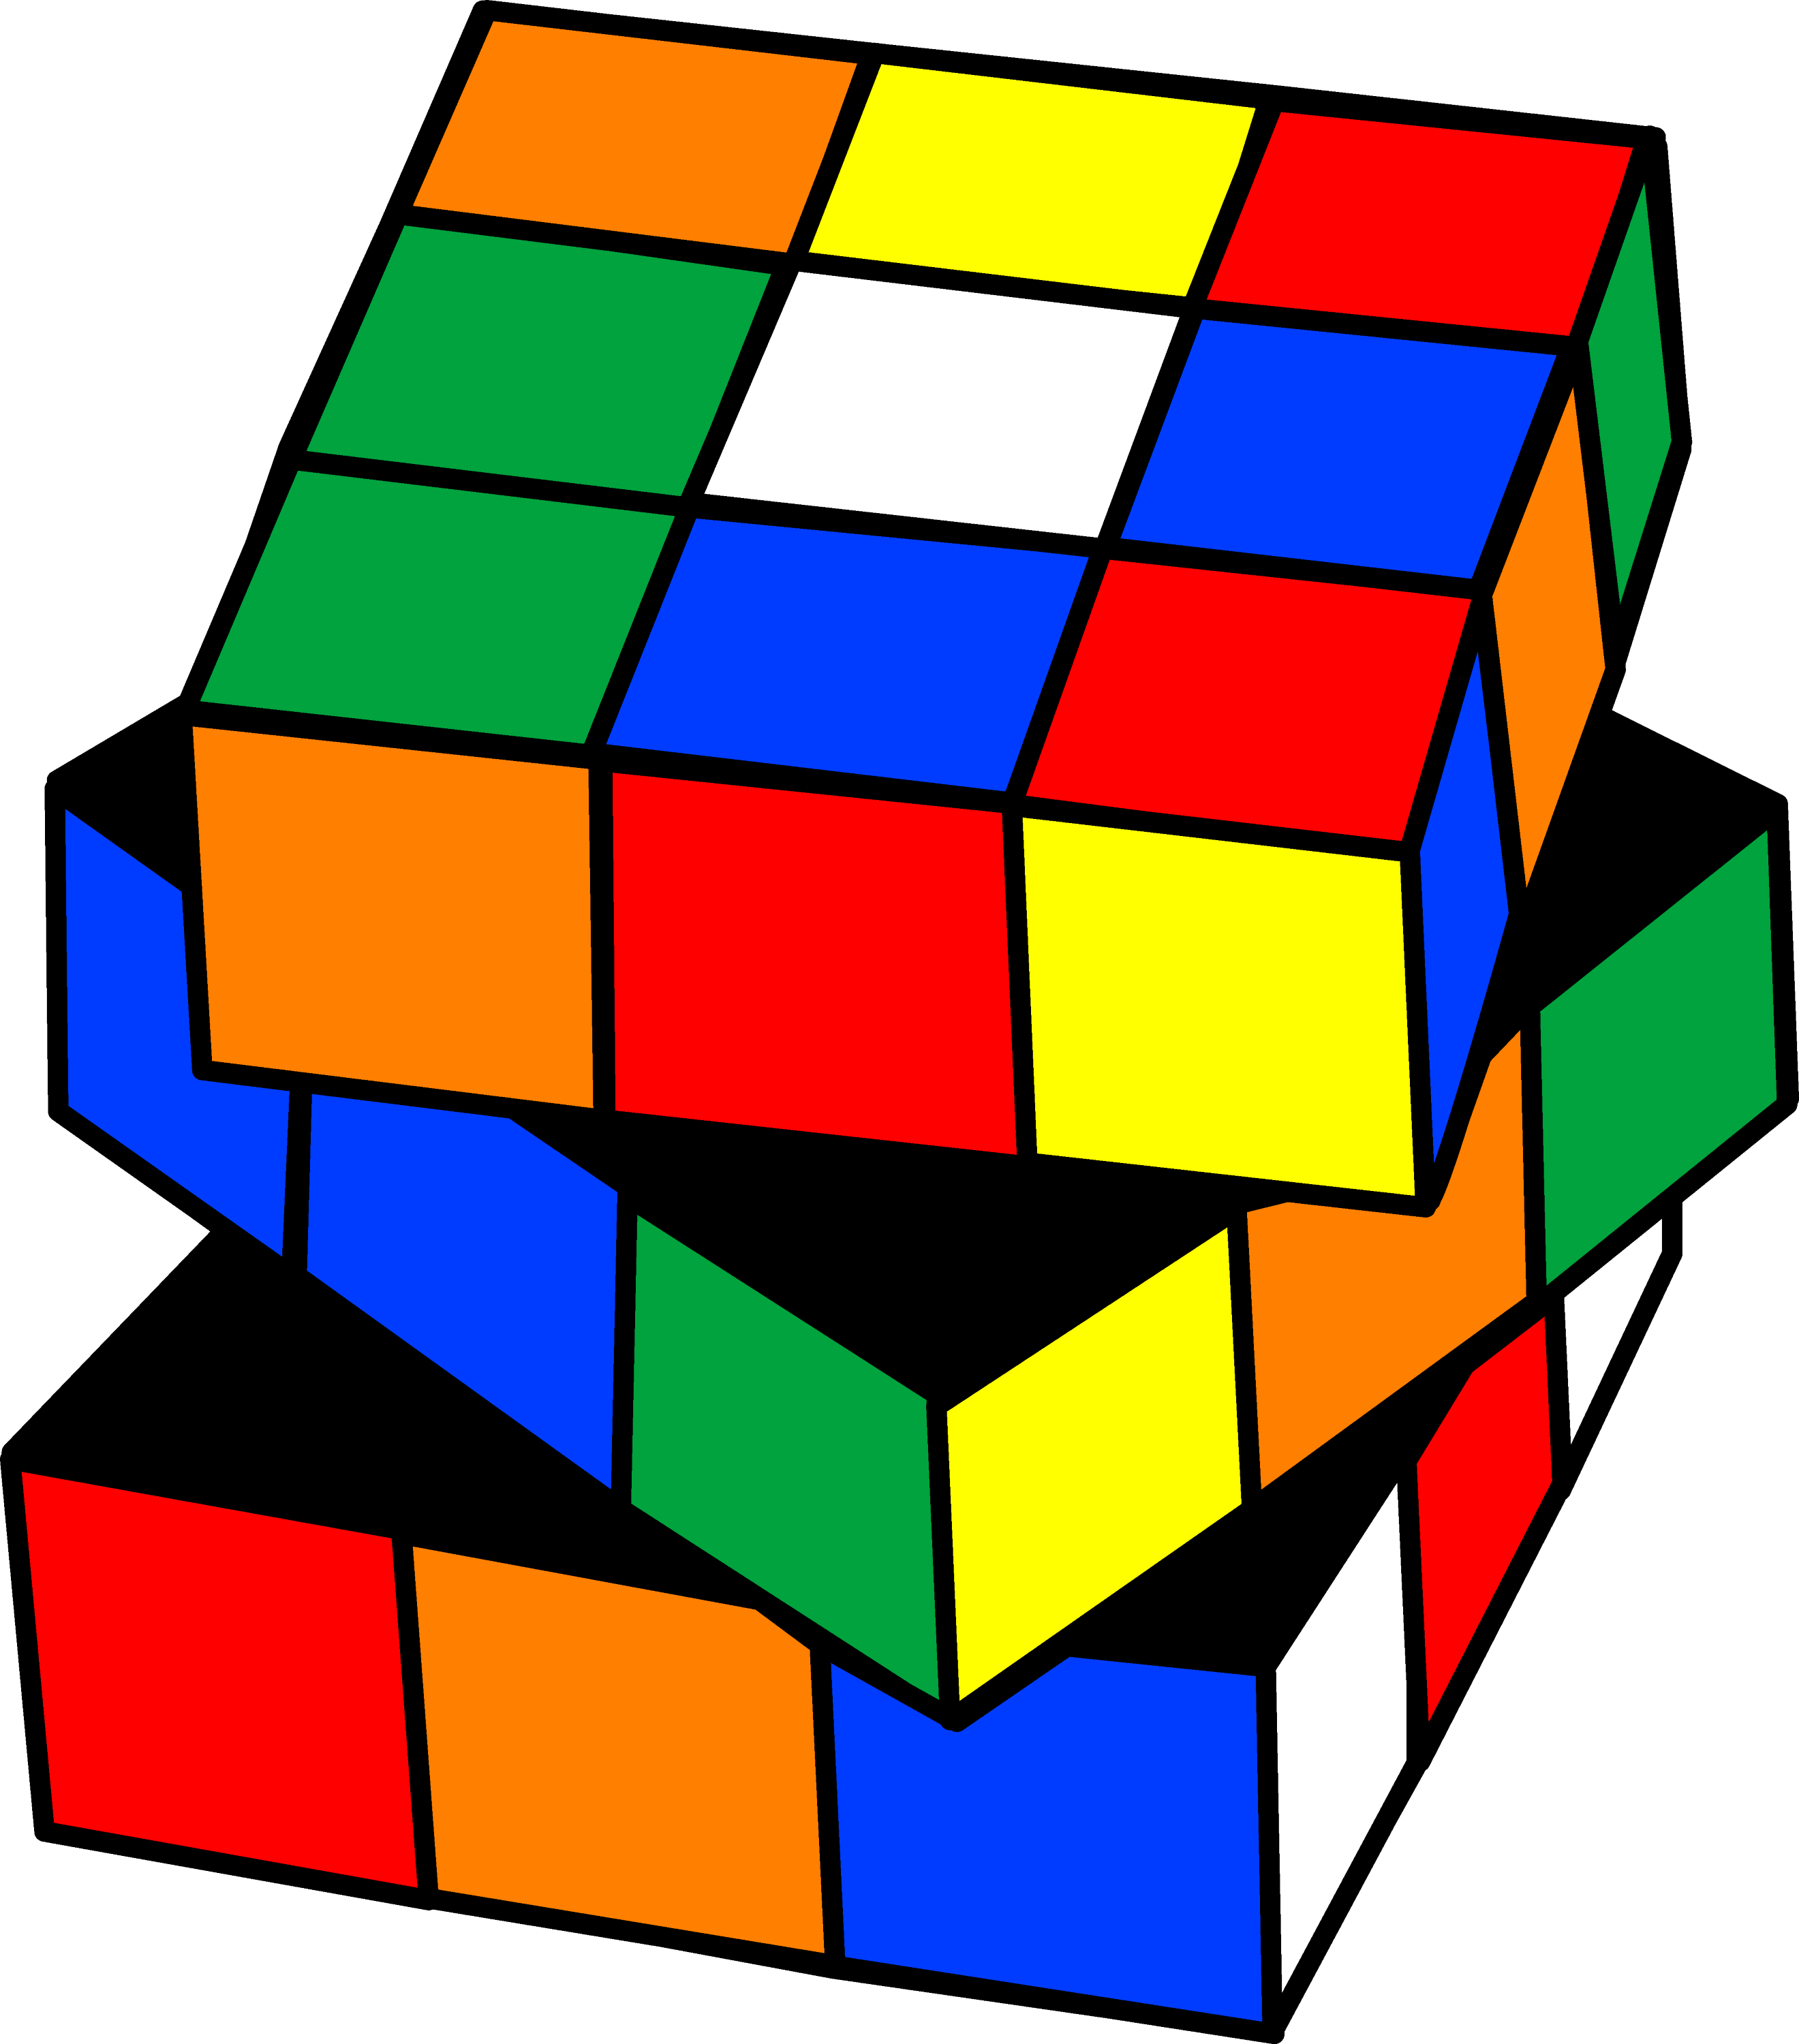 Rubiks Cube Puzzle Toy Free Clip Art